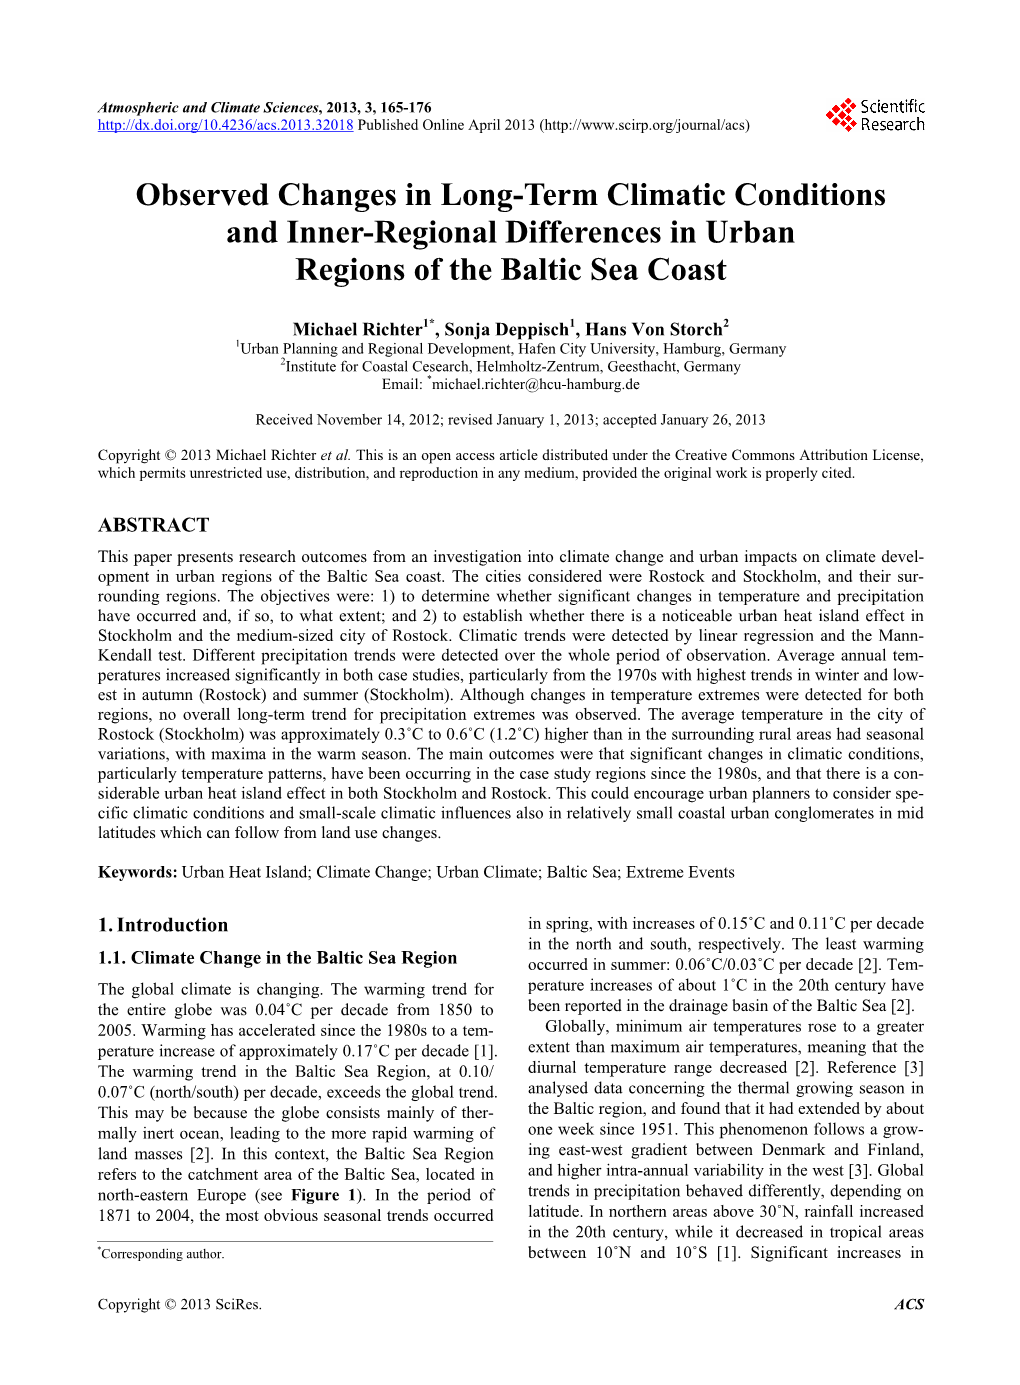 Observed Changes in Long-Term Climatic Conditions and Inner-Regional Differences in Urban Regions of the Baltic Sea Coast